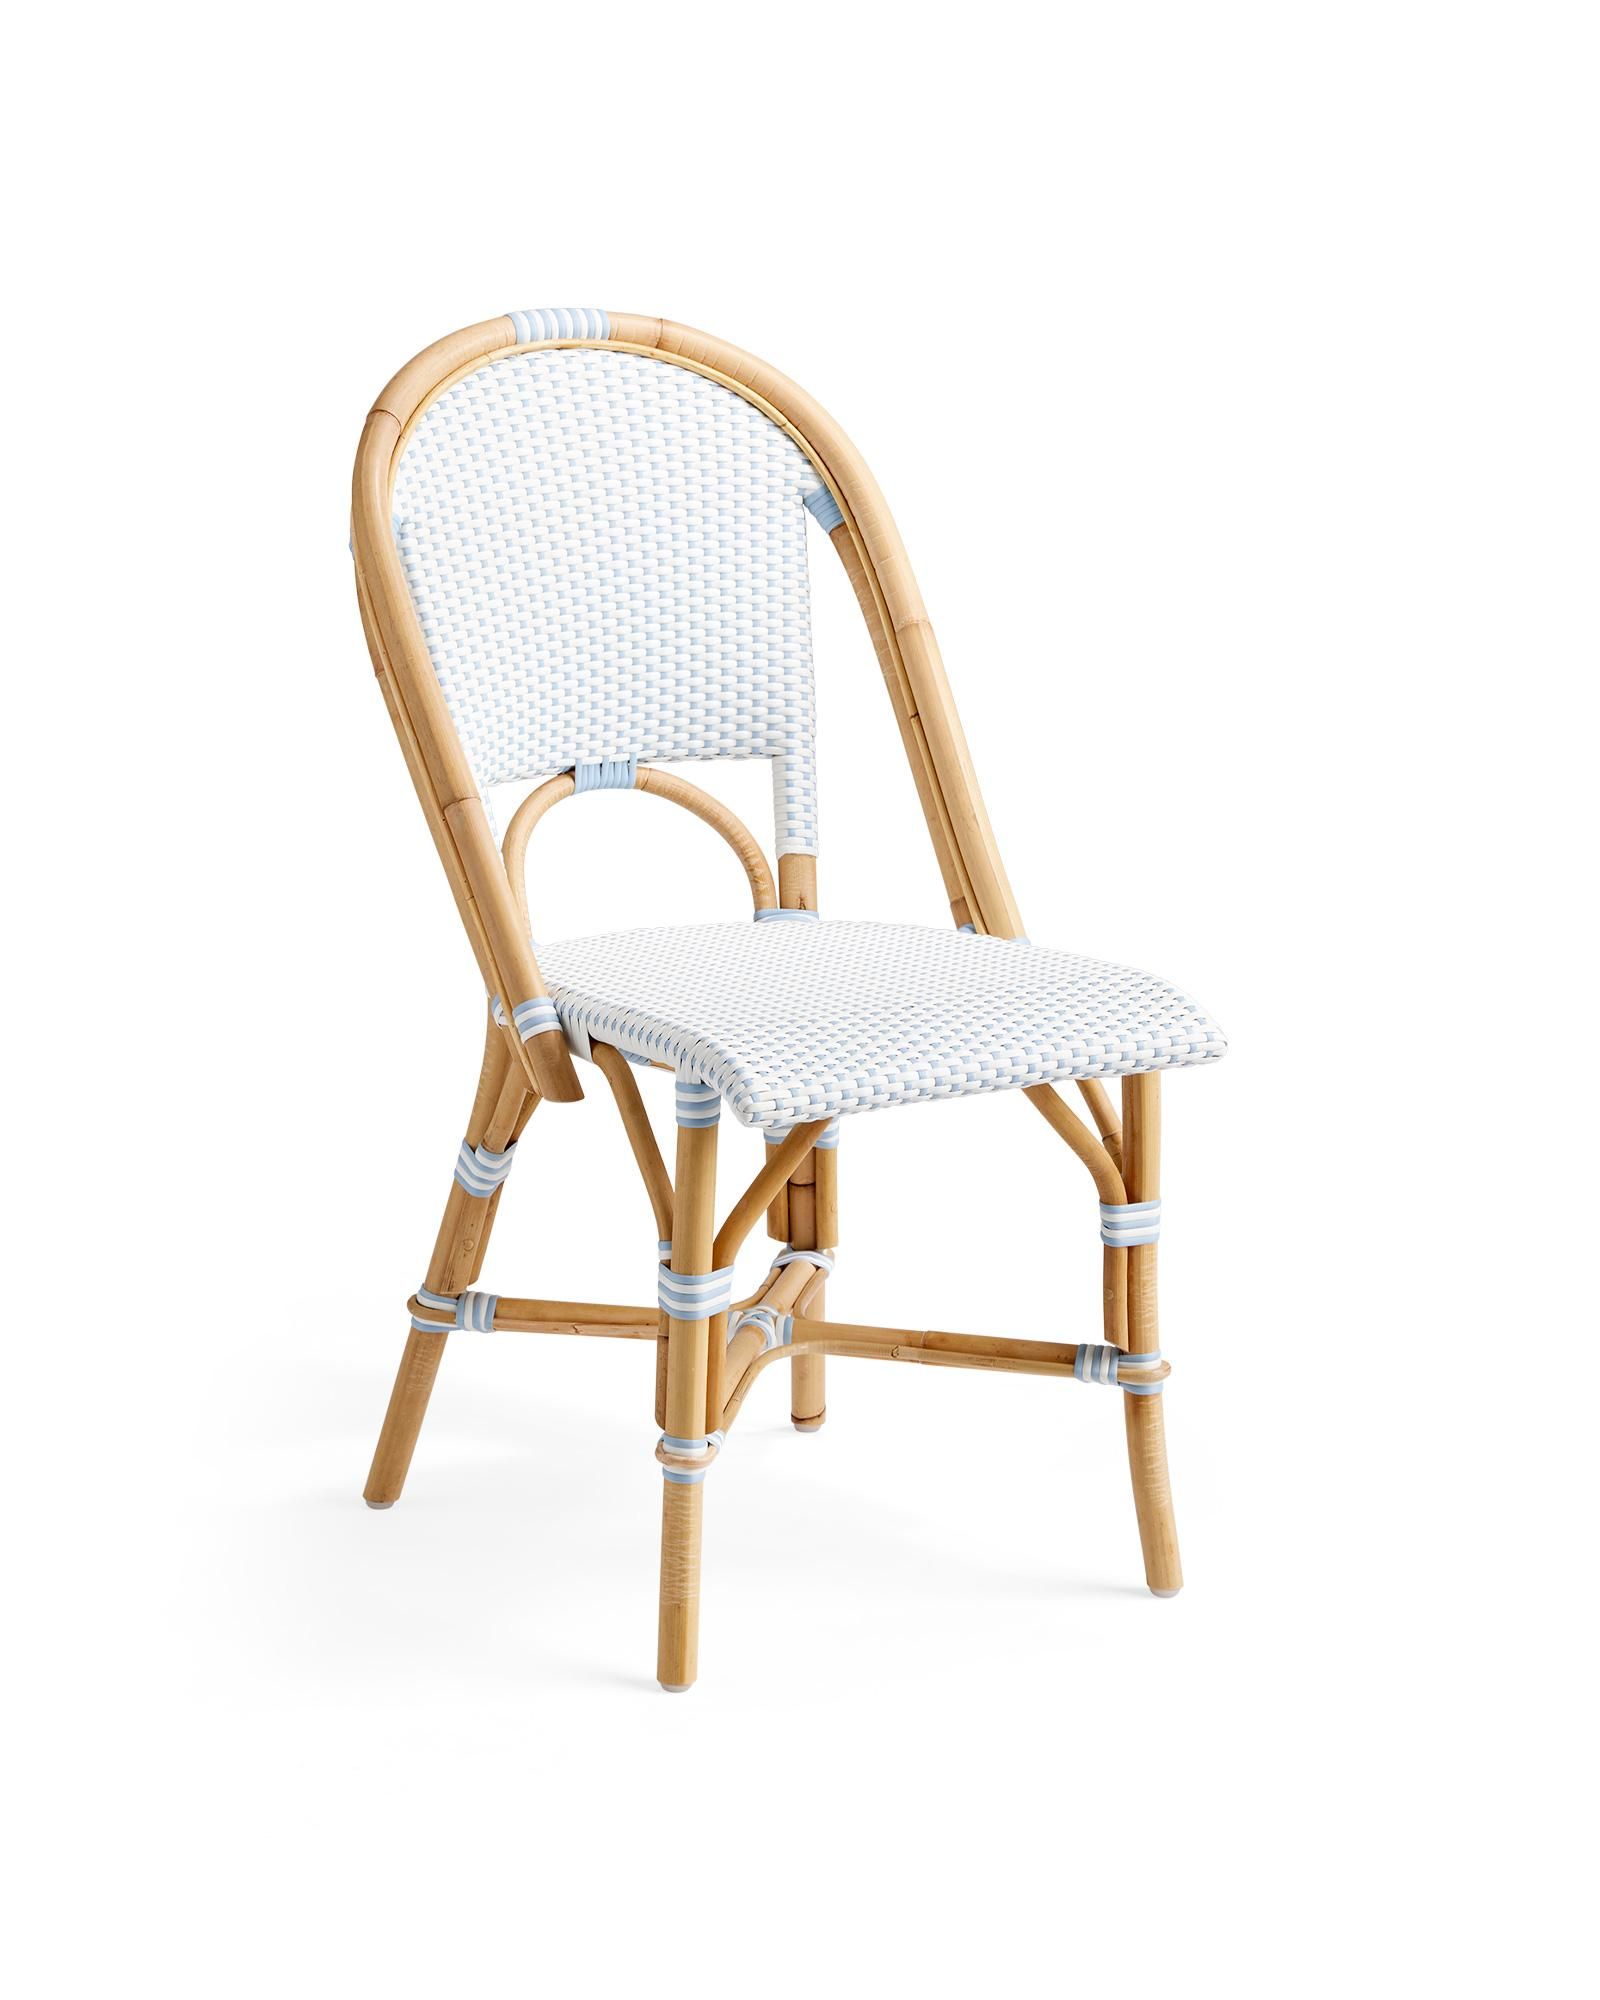 Riviera Rattan Dining Chair | Serena and Lily